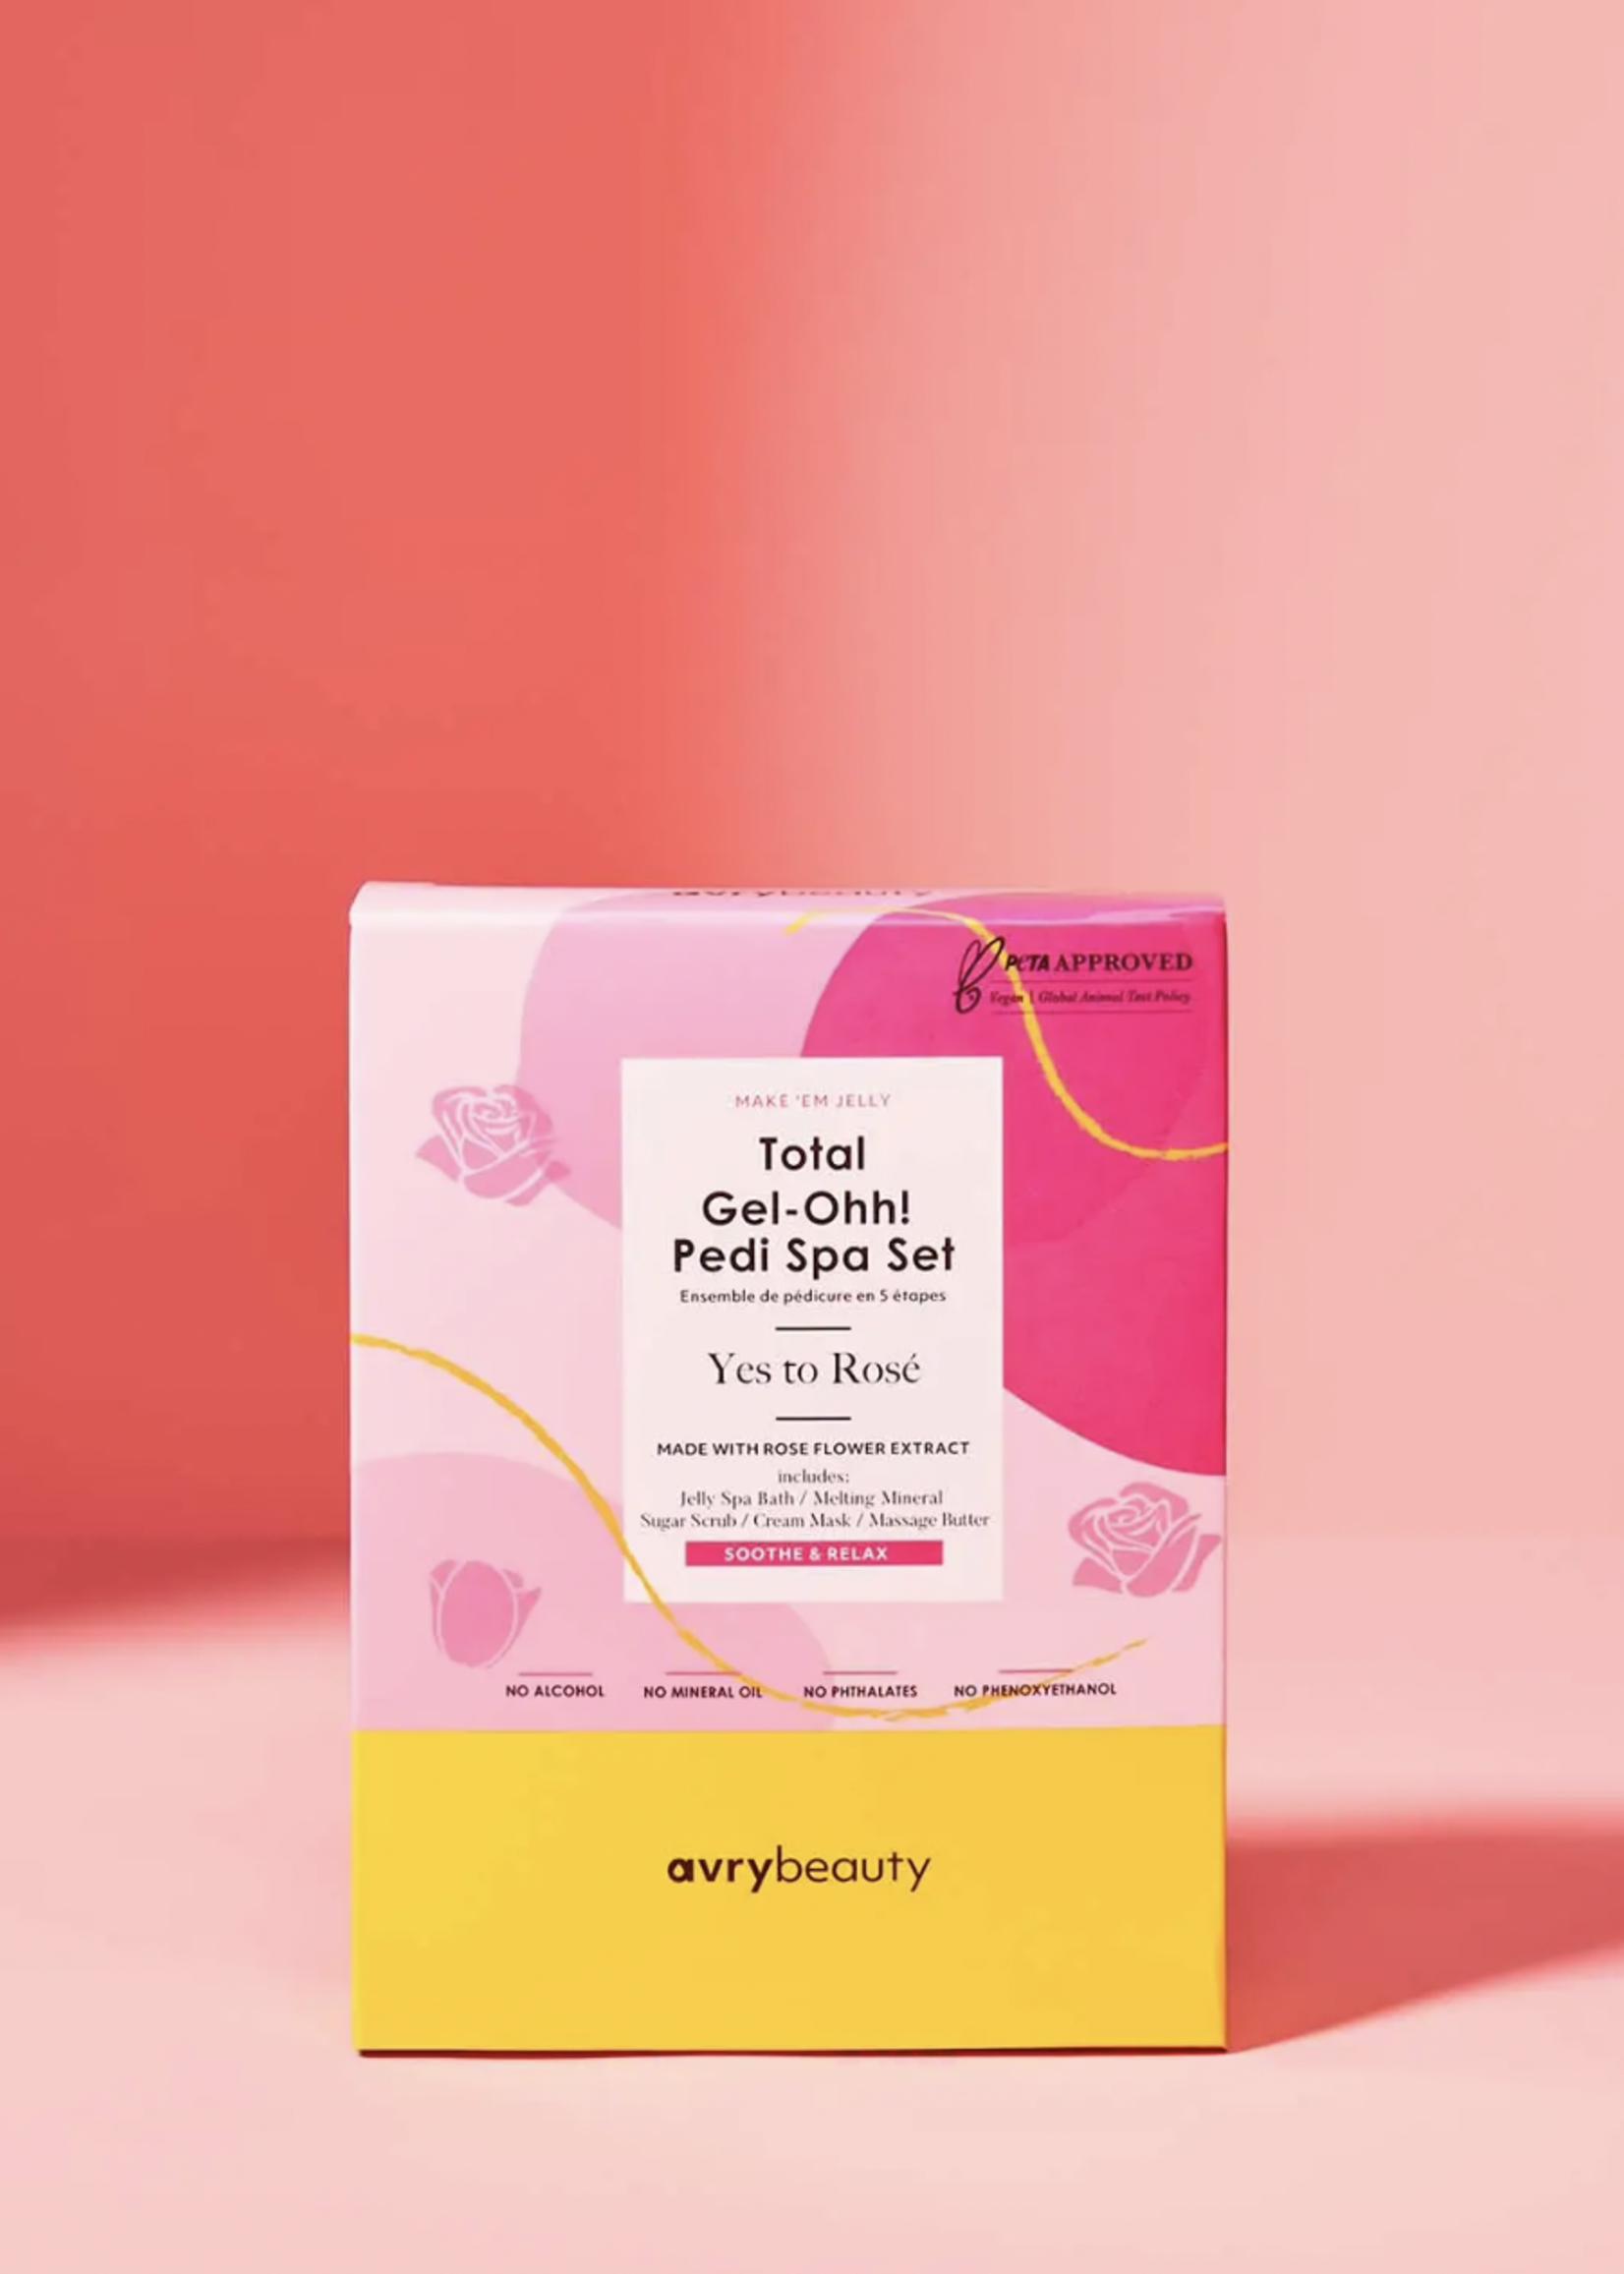 Creative Twist Events Yes to Rosé Total Gel-Ohh! Pedi Spa Set